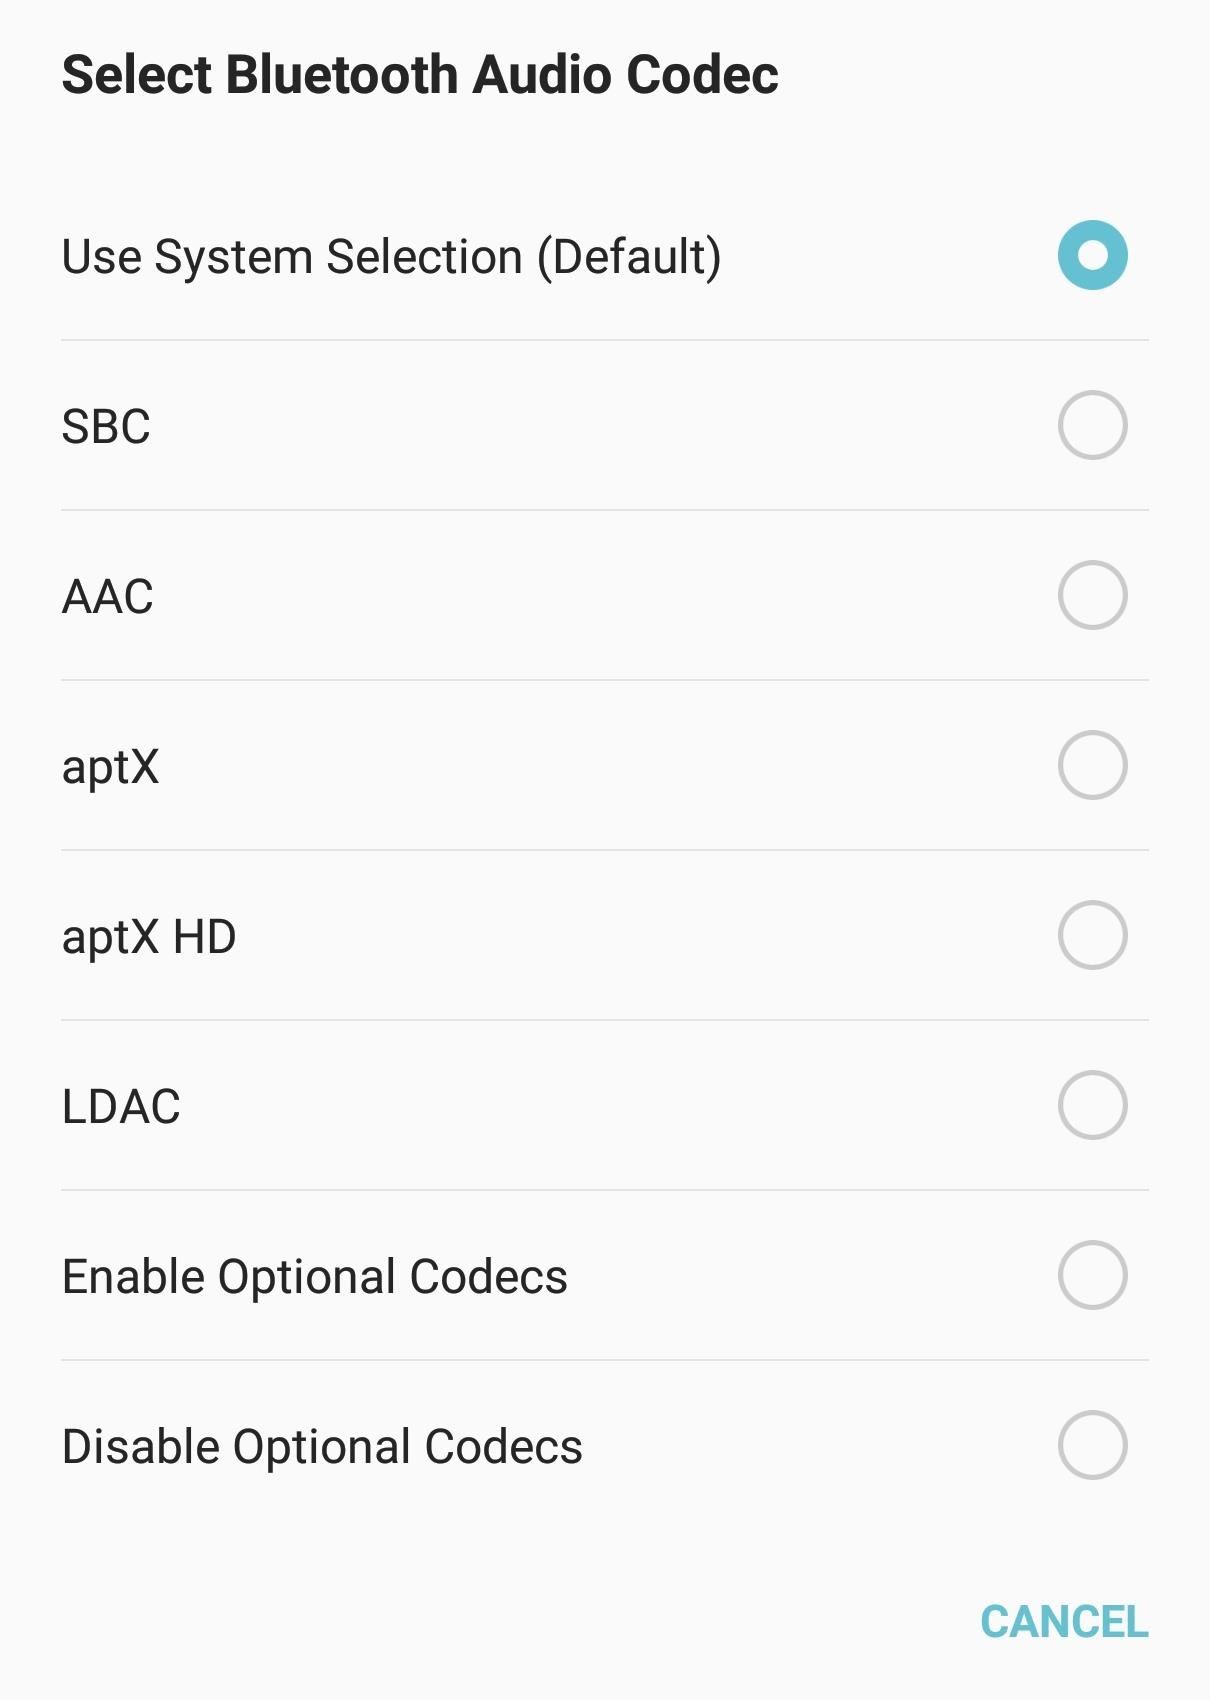 24 New Features & Changes the Android Oreo Update Gives Your LG V30